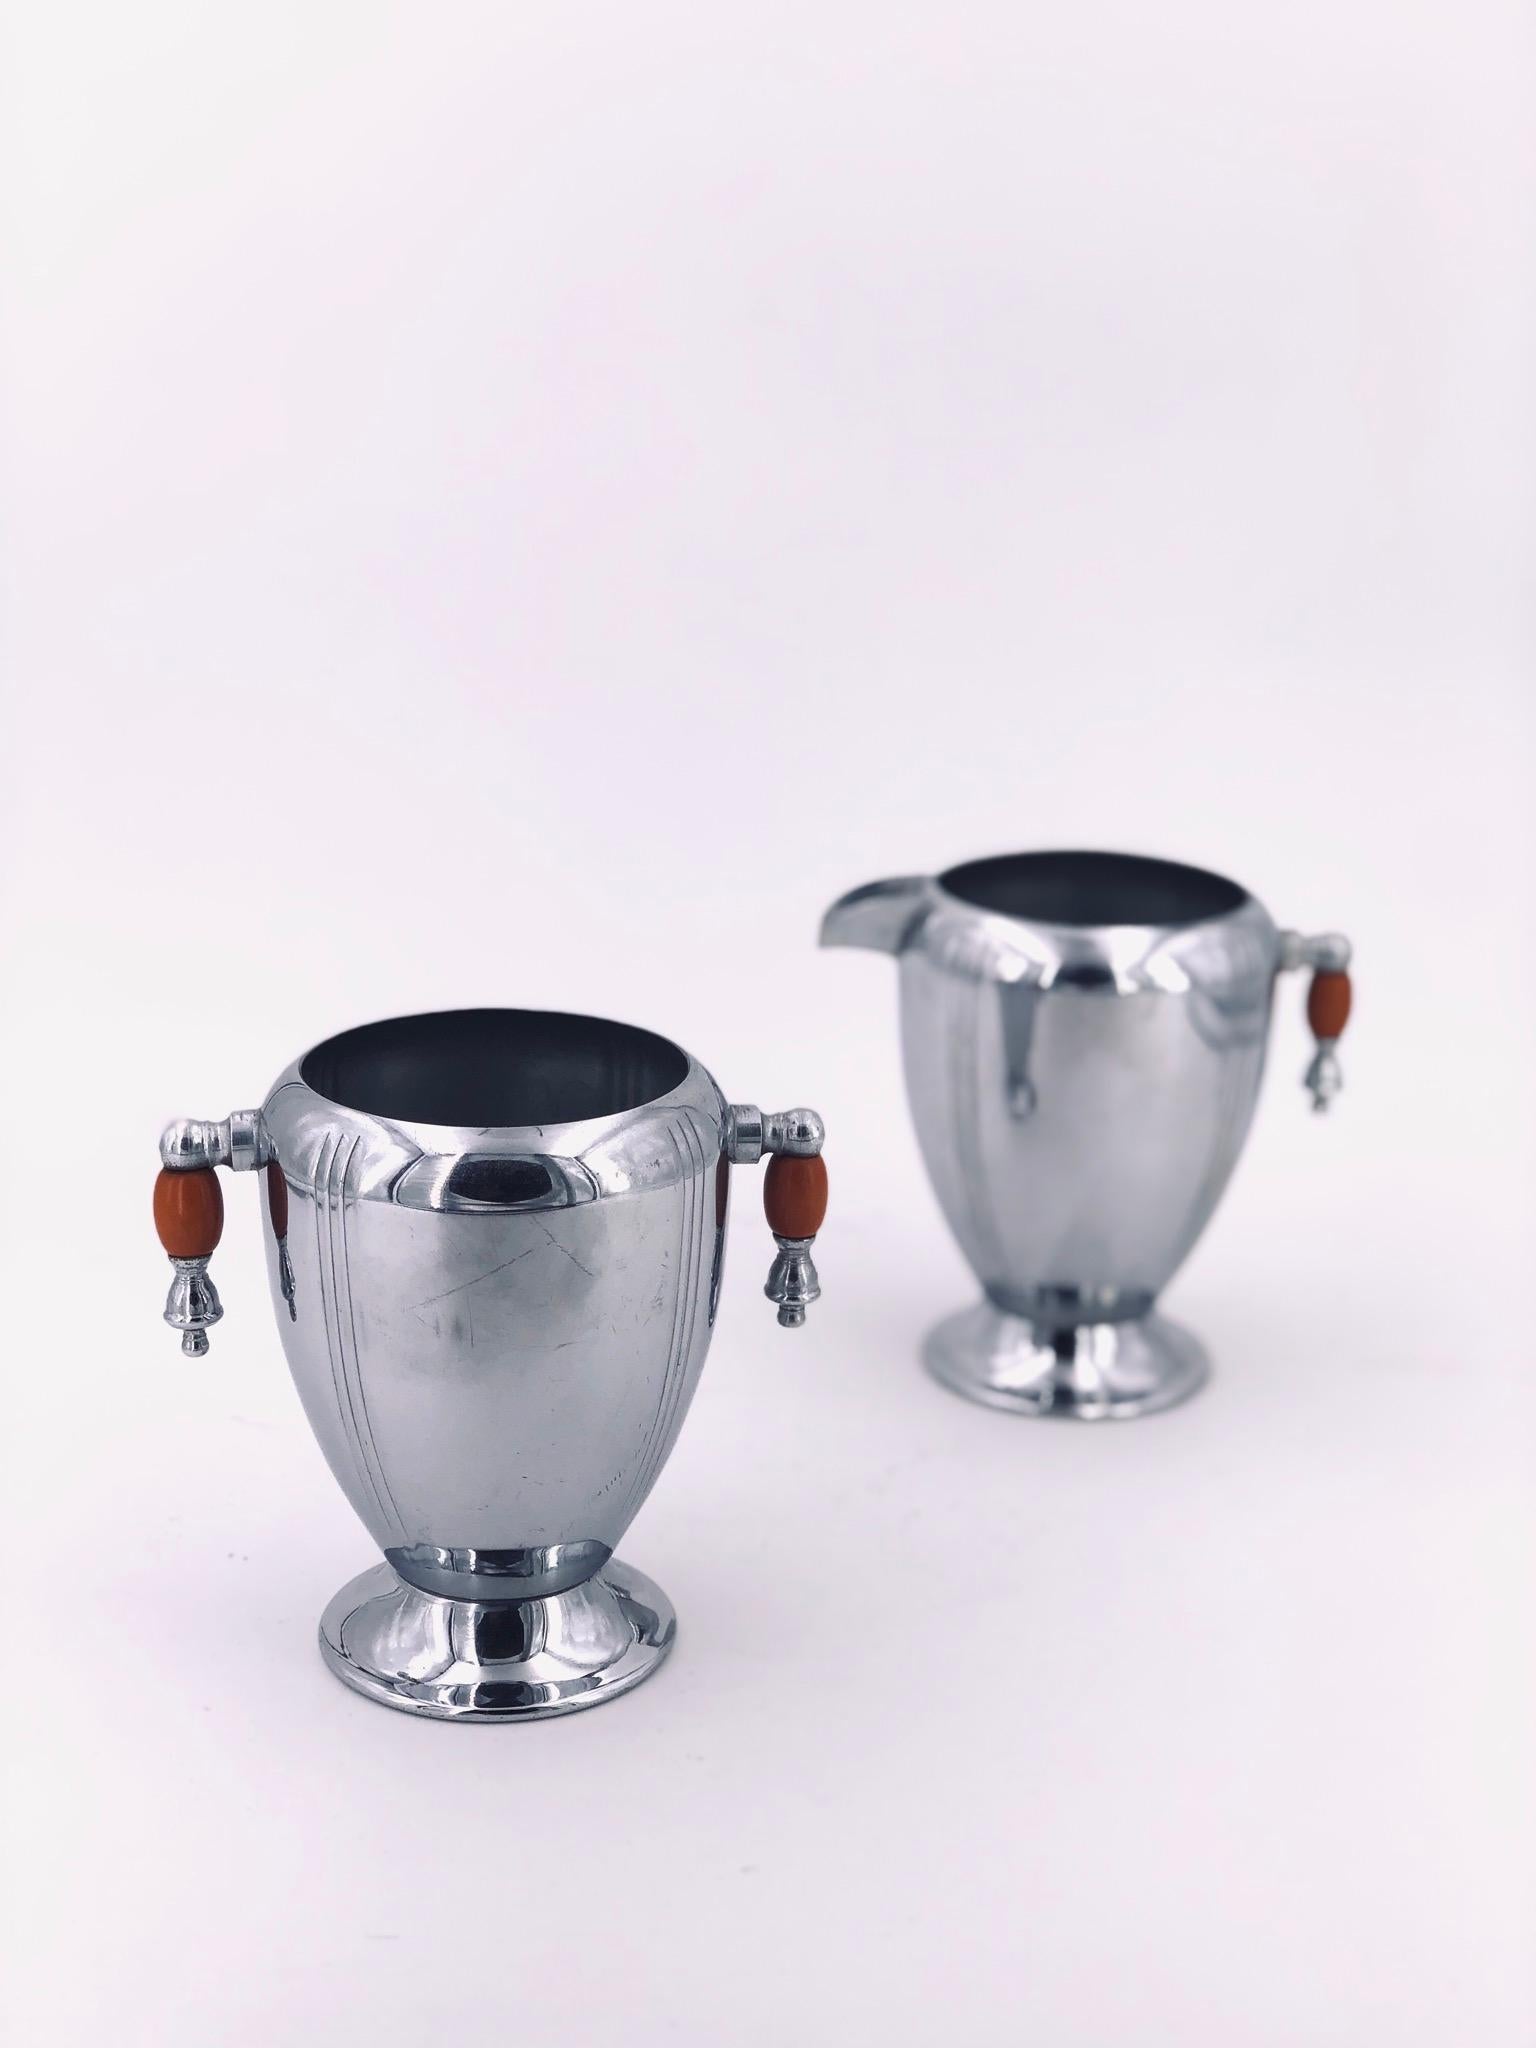 A rare set of chrome sugar and creamer, with bakelite, handles designed by Walter Von Nessen, for Manning Bowman in very good condition, circa 1930s.